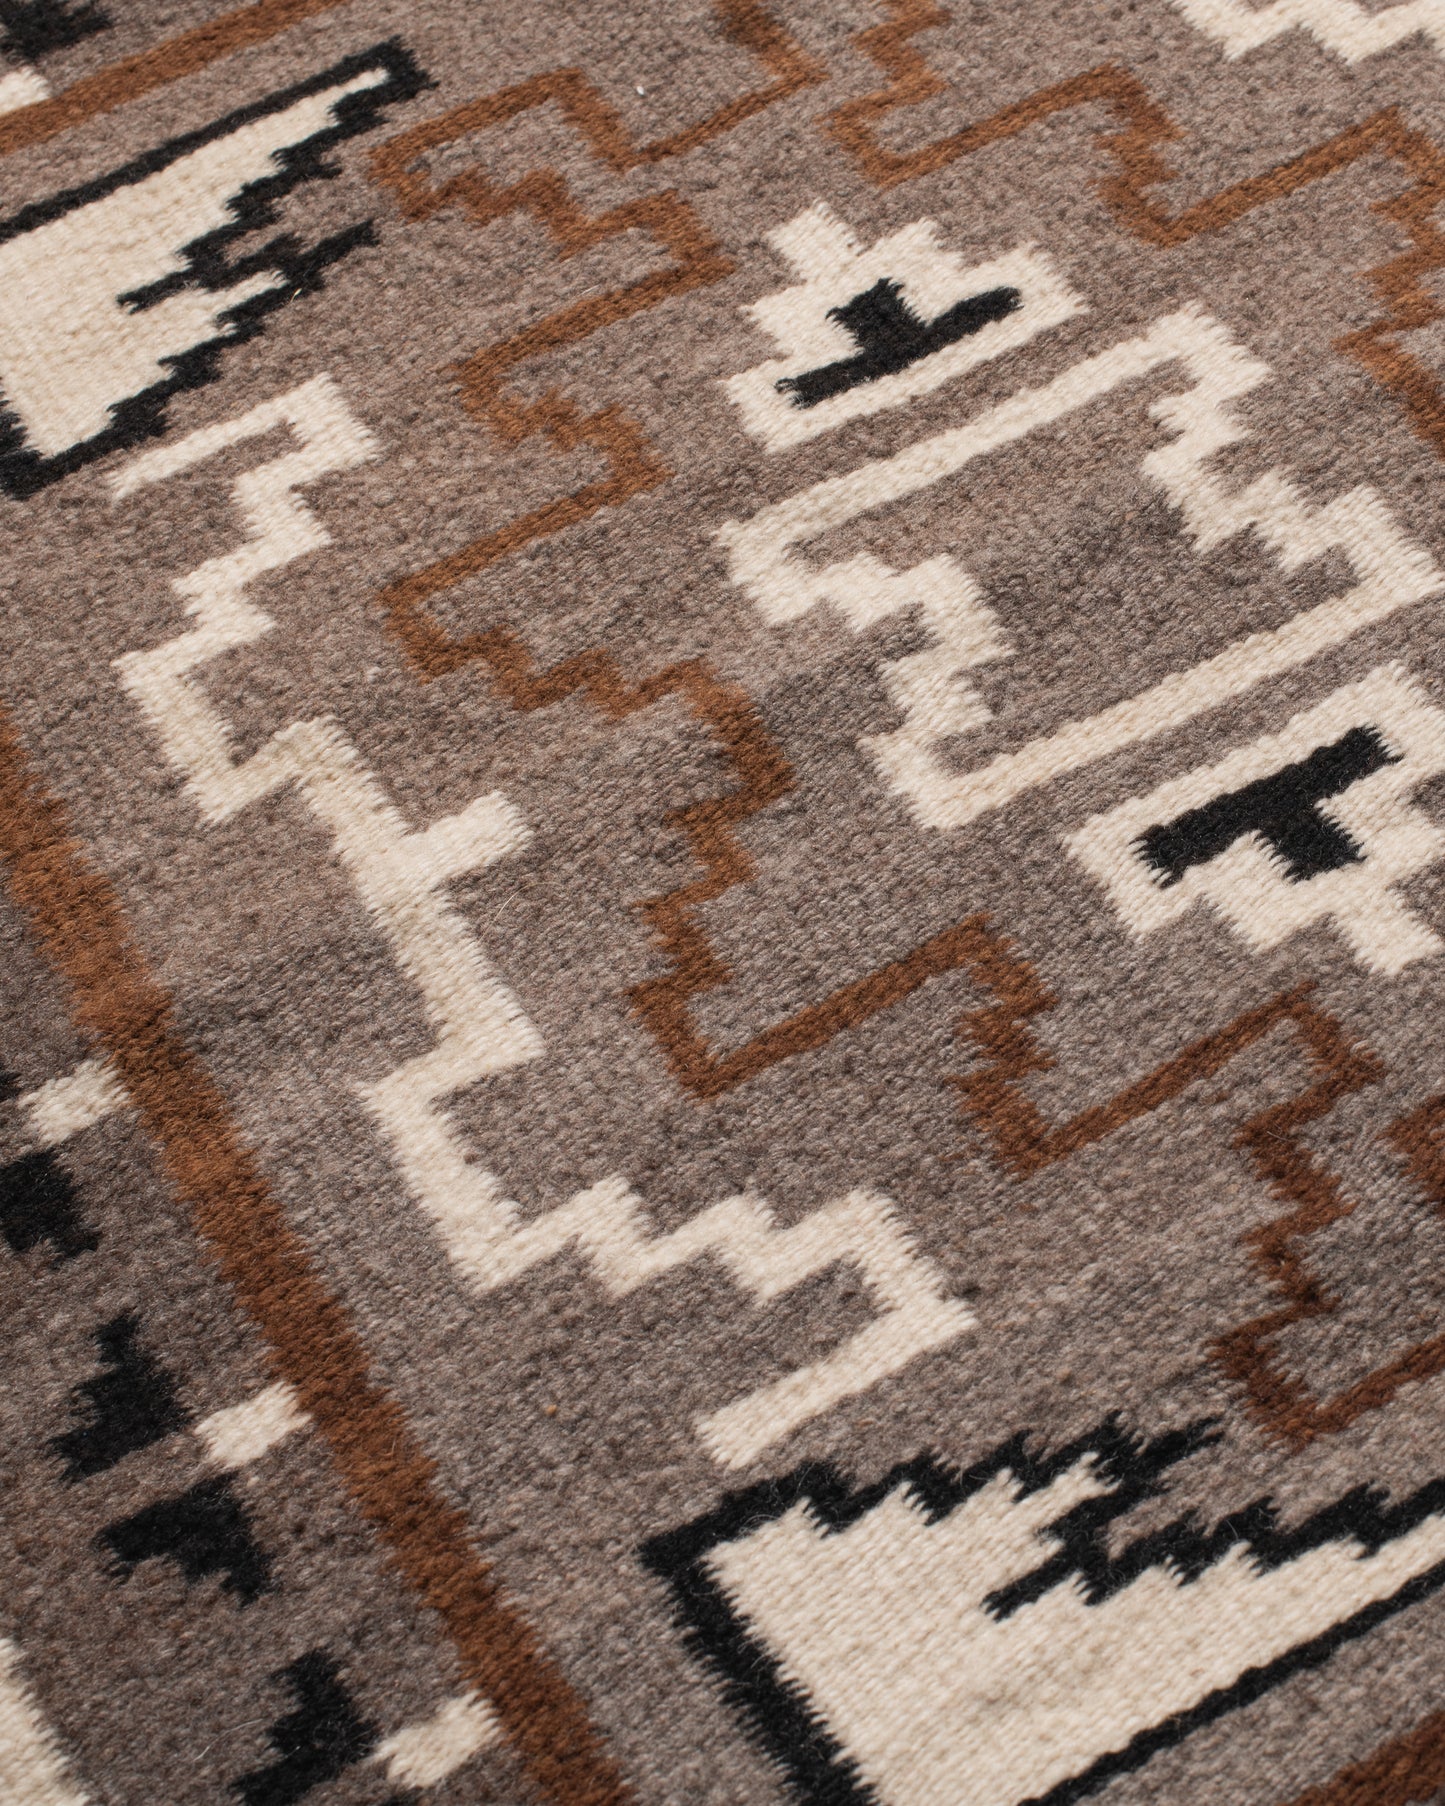 A vintage Navajo square rug with the traditional Two Grey Hills weaving